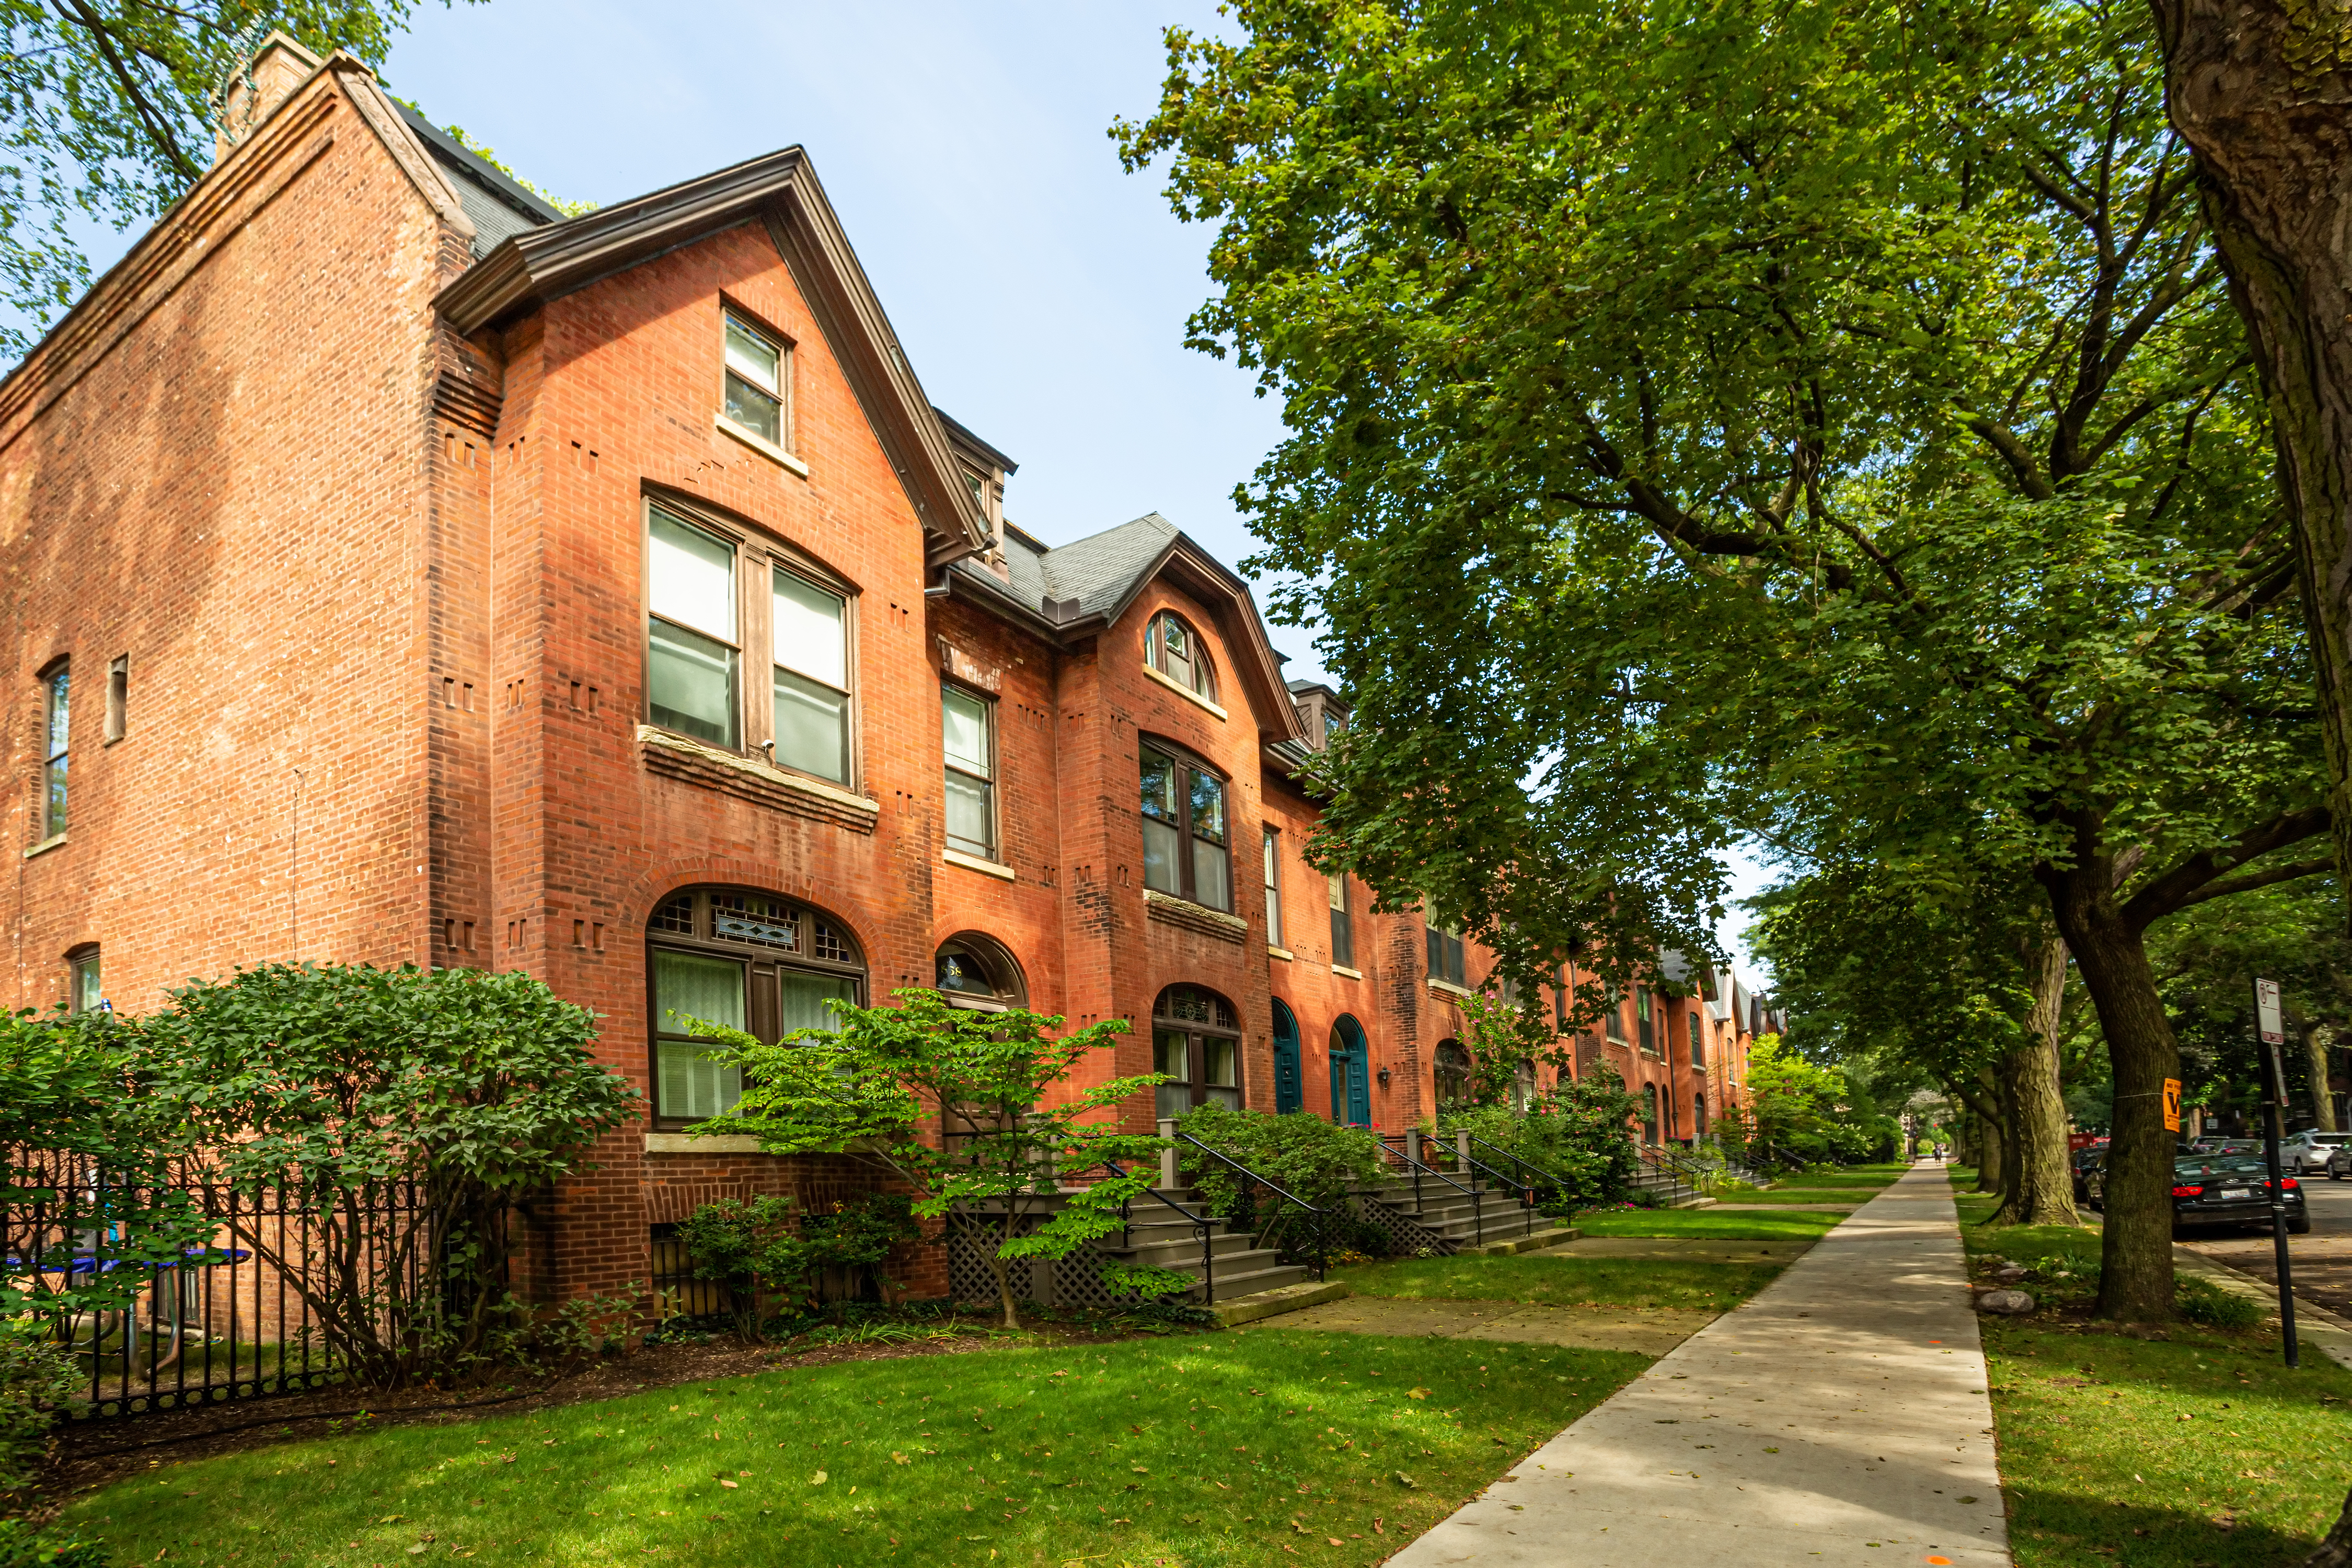 A row of brick houses in a neighborhood with a tree-lined parkway